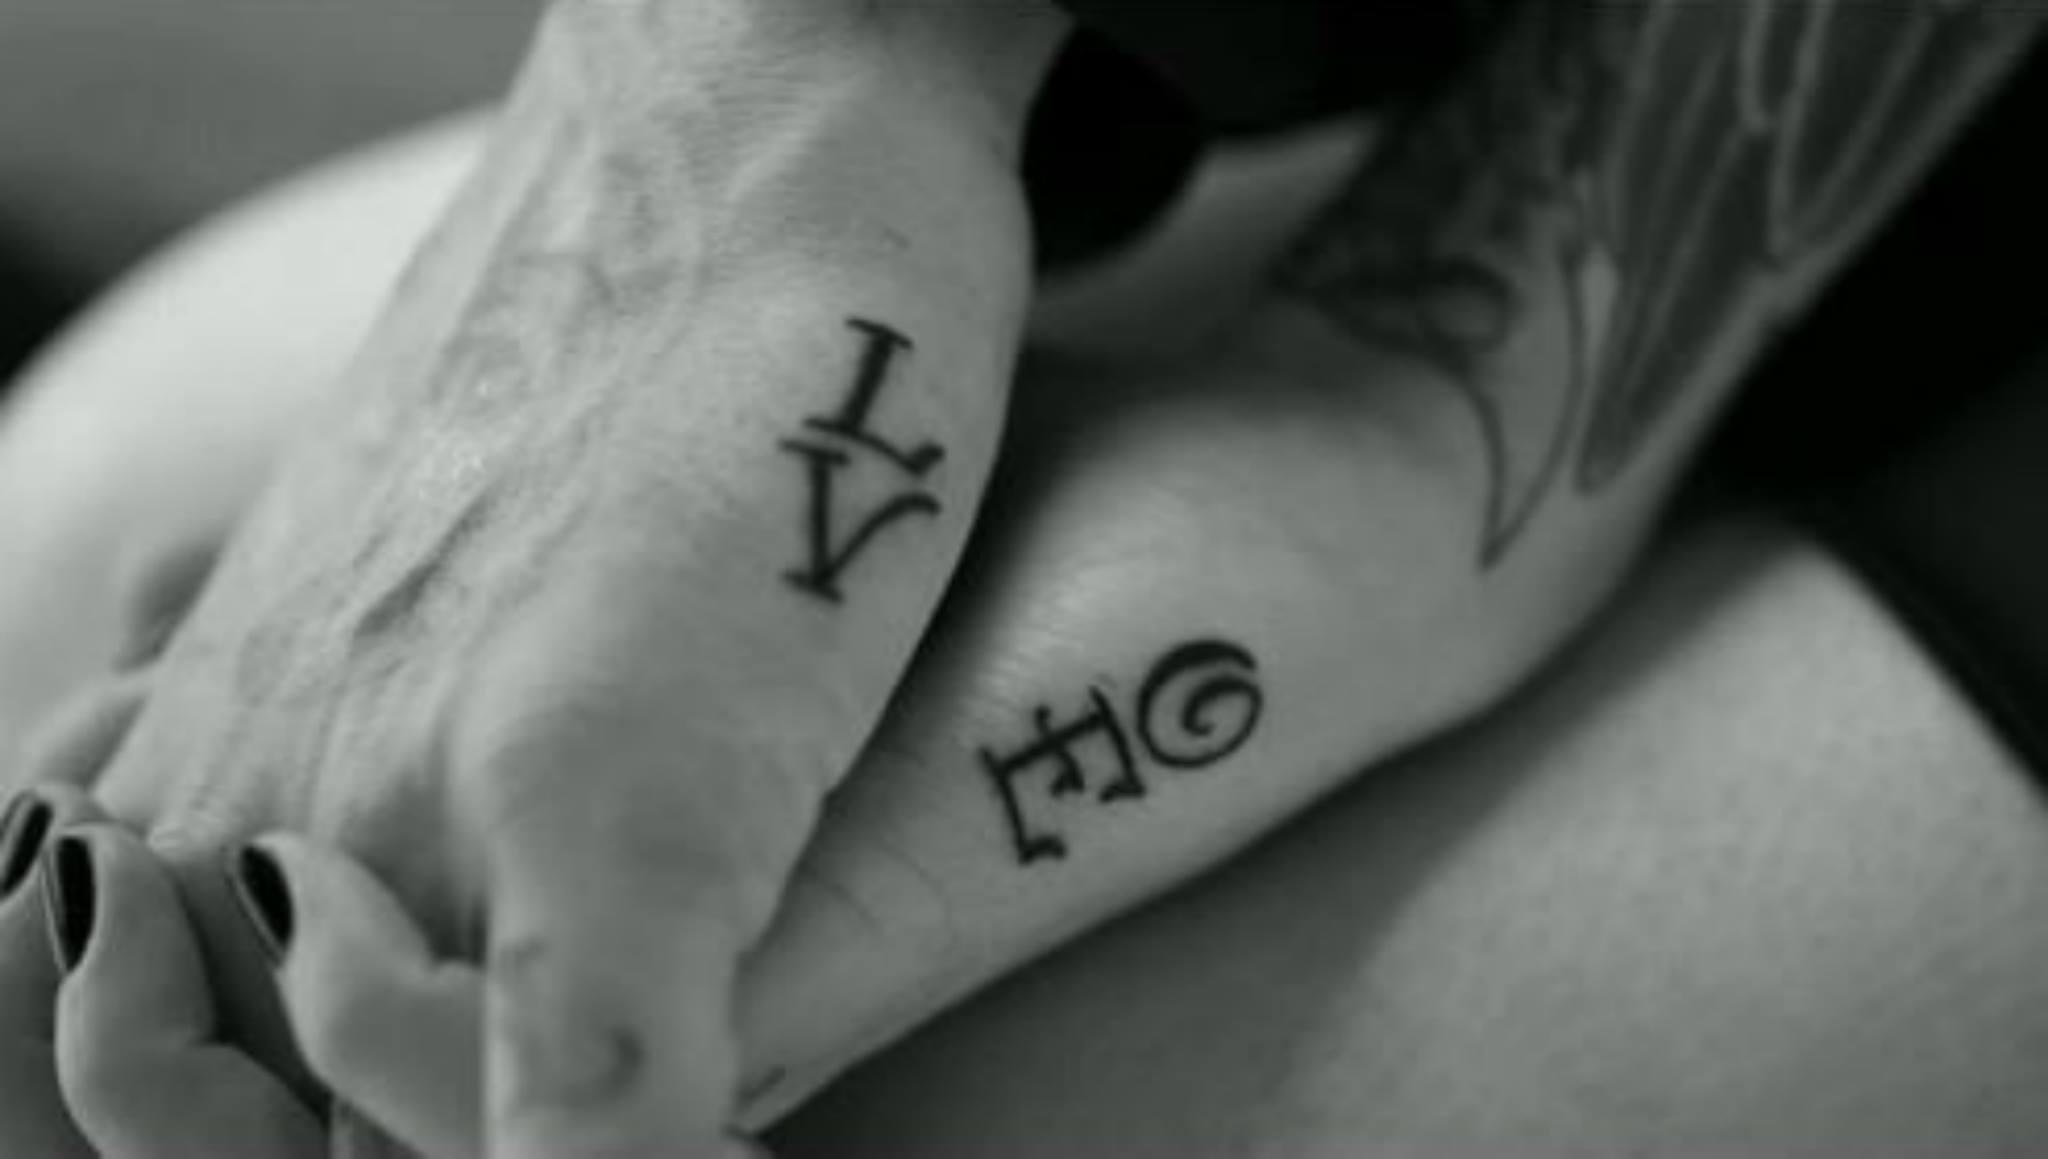 Love Word Couple Matching Tattoos On Fingers